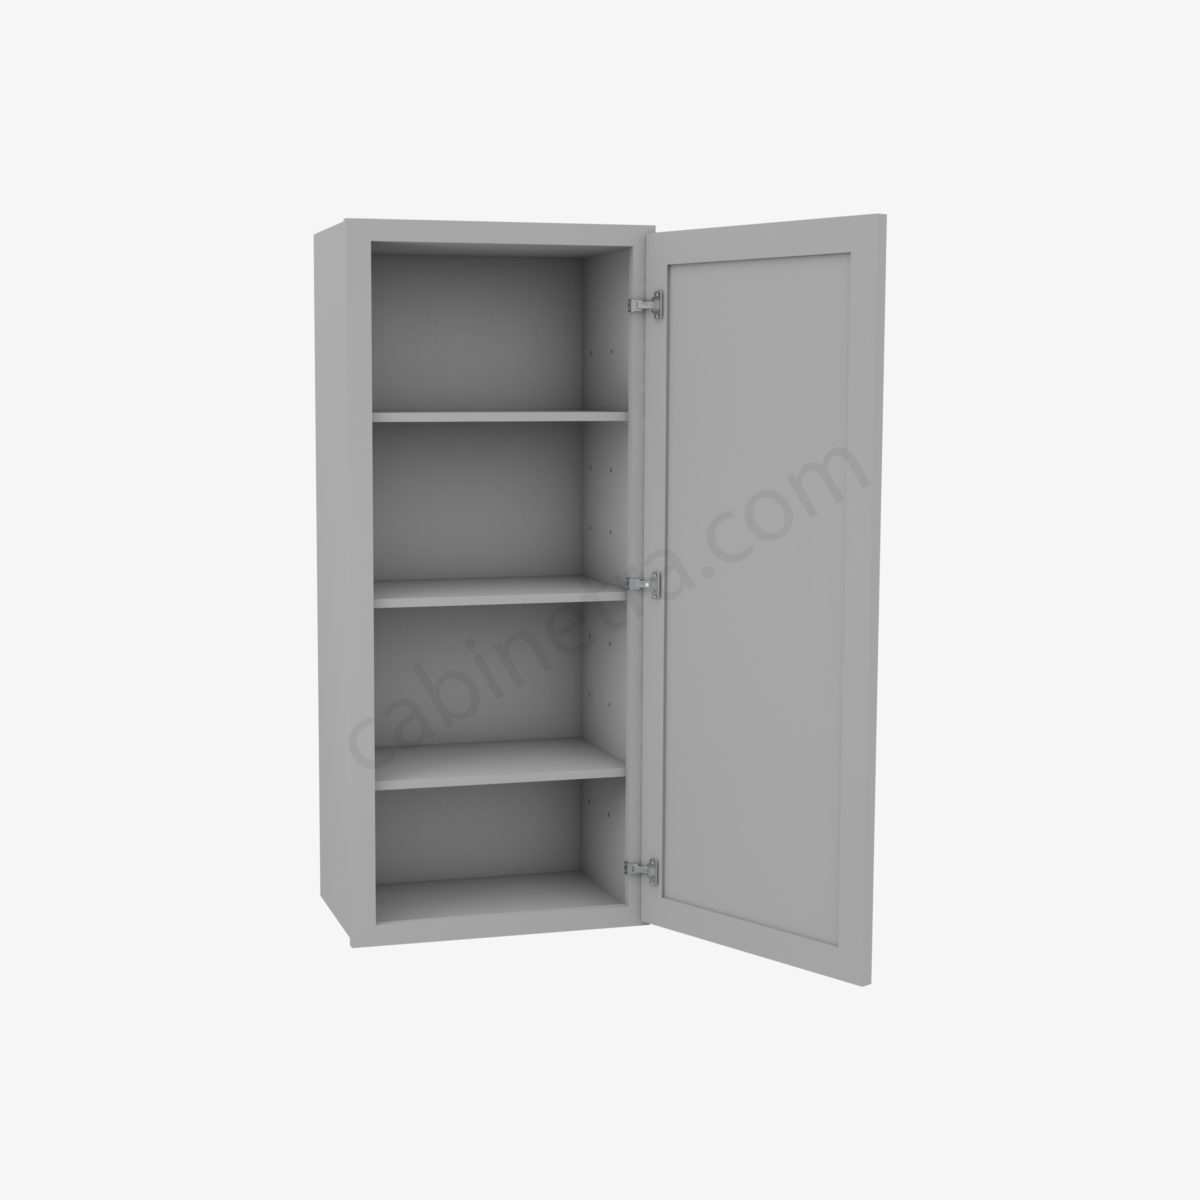 AB W1842 1 Forevermark Lait Gray Shaker Cabinetra scaled